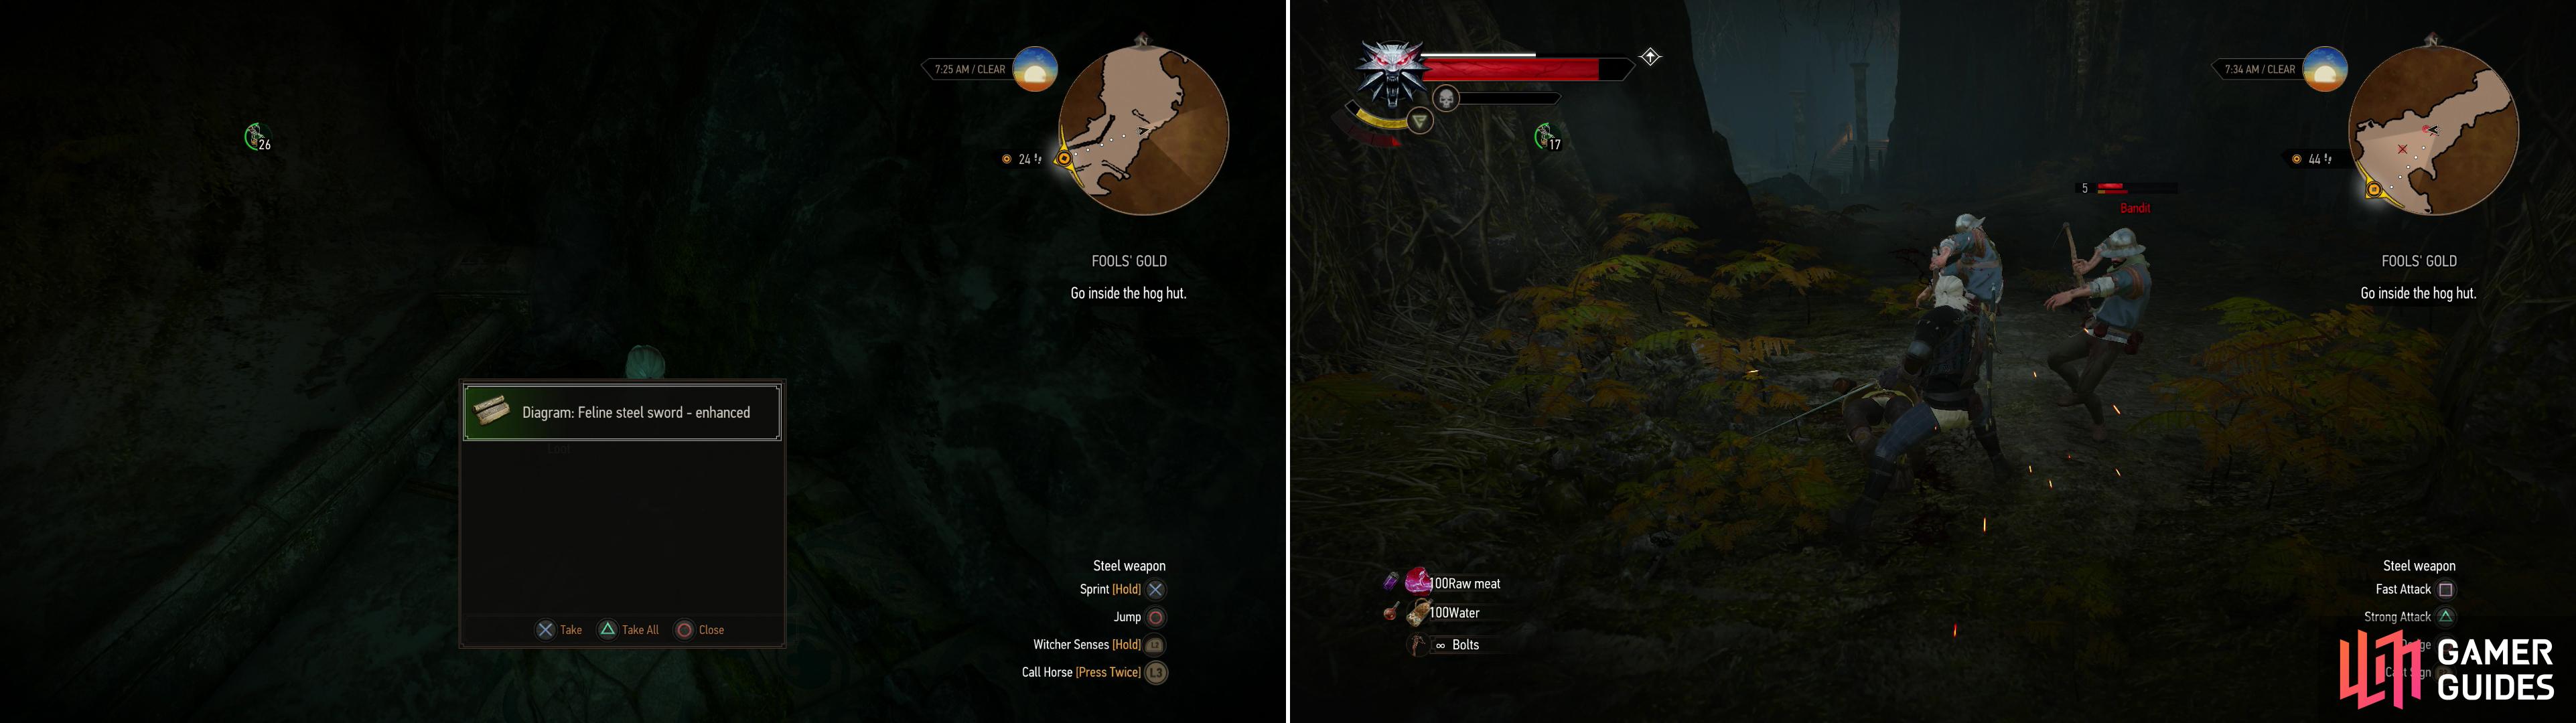 In the cave where the “hog hut” is located you can find the Diagram: Feline Steel Sword - Enhanced (left). There are also Bandits in and around the cave that need to be put down (right).